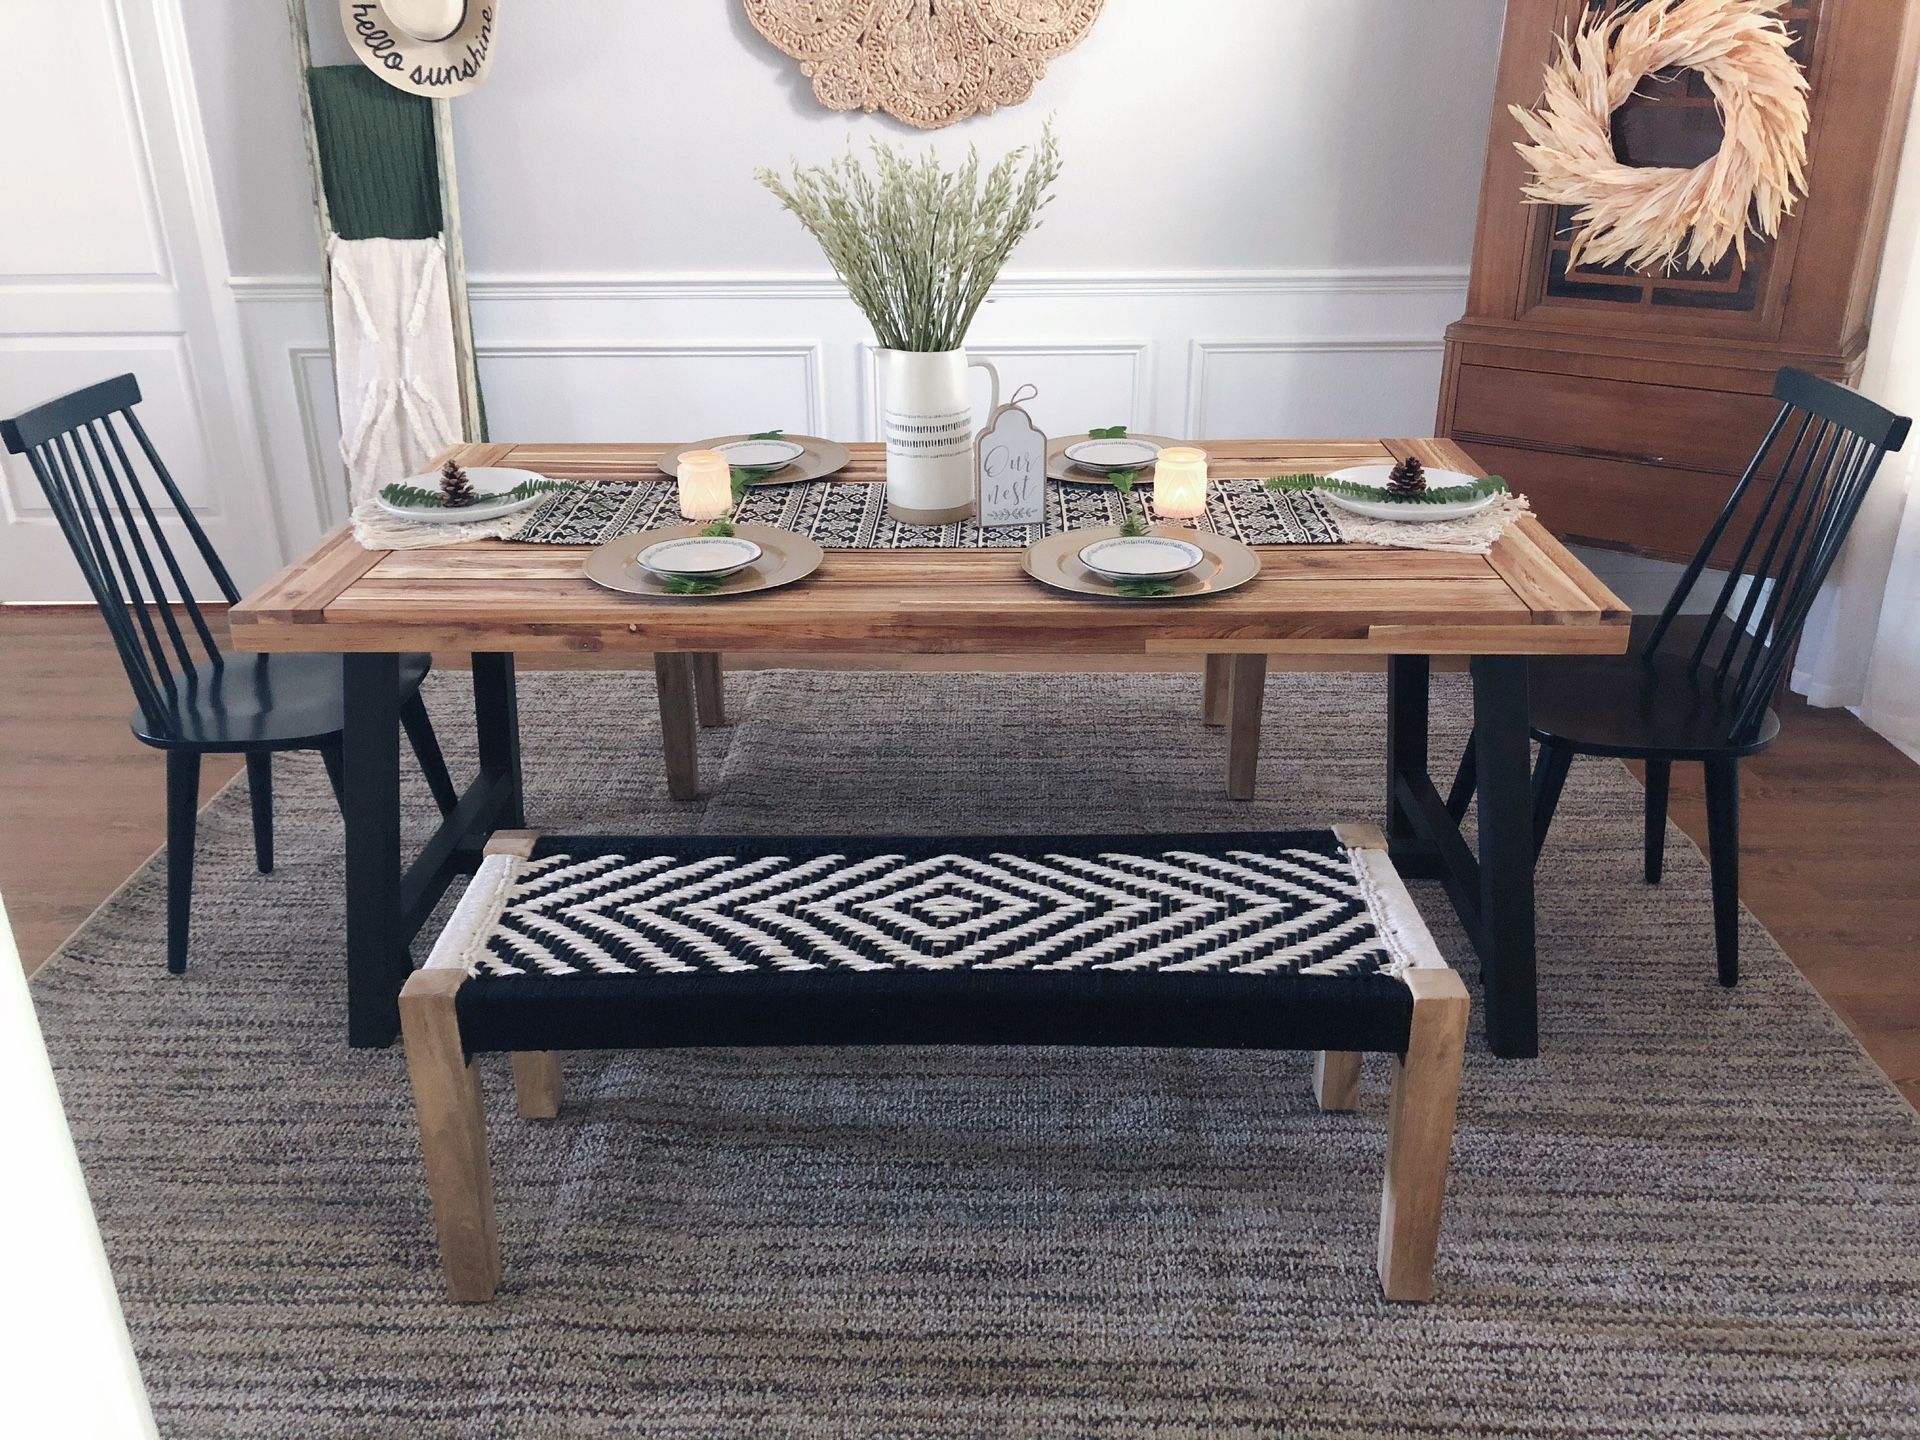 Boho dining set with rug and table decor!